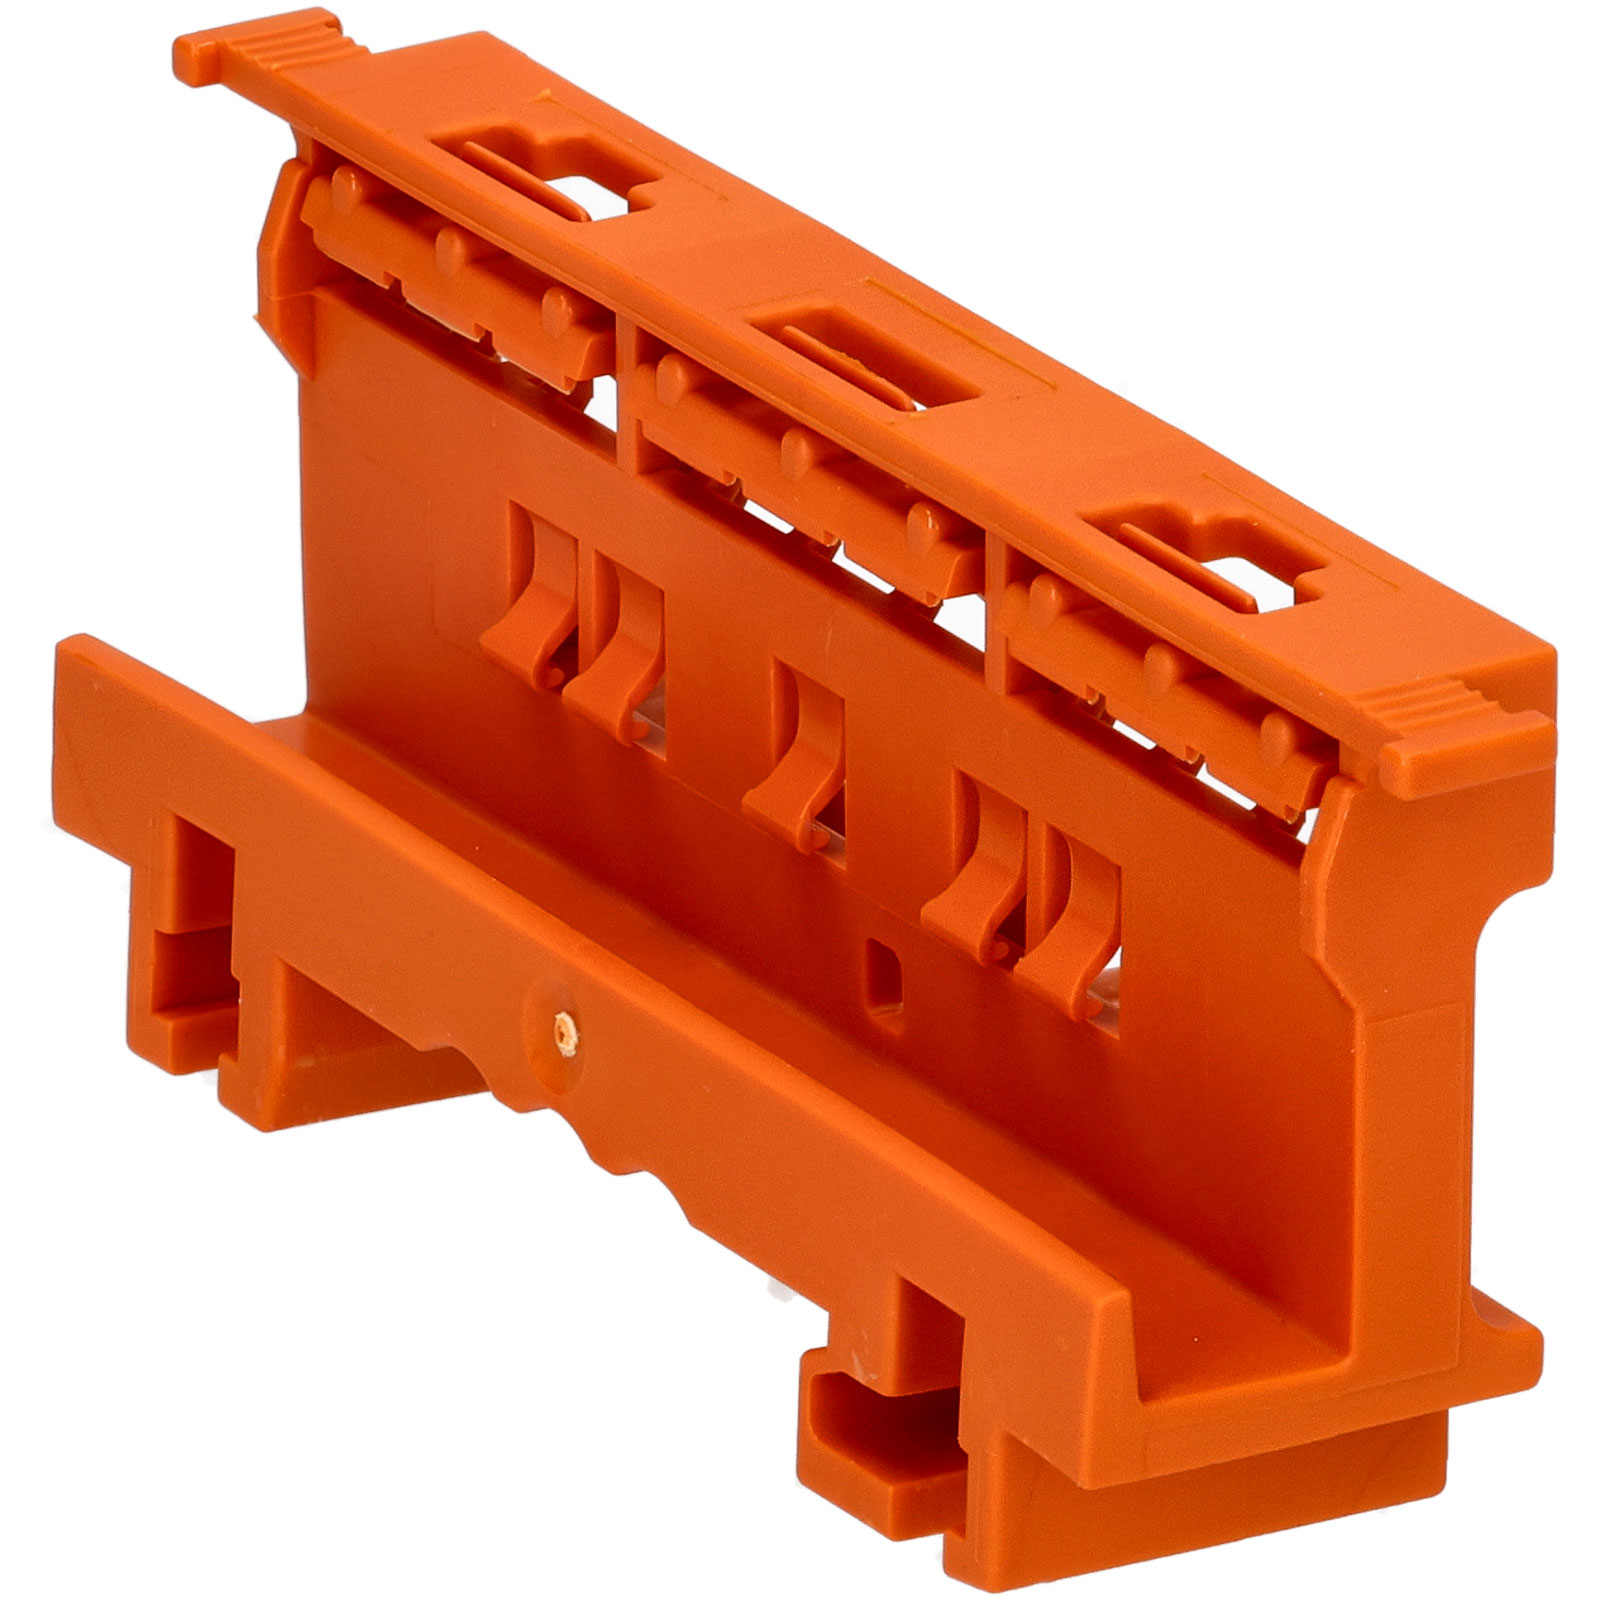 WAGO 221-500 Mounting Carrier, DIN Rail